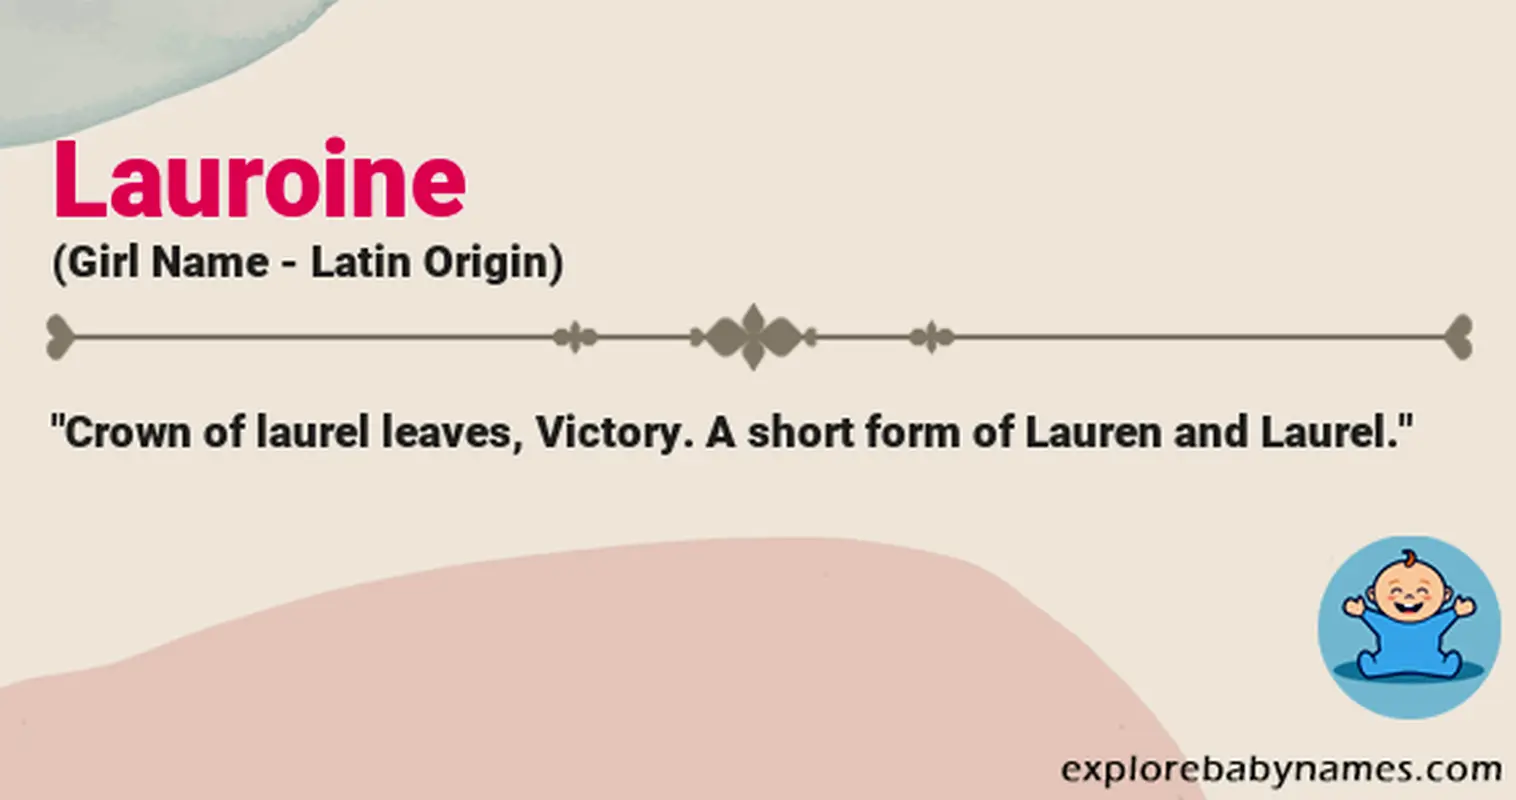 Meaning of Lauroine